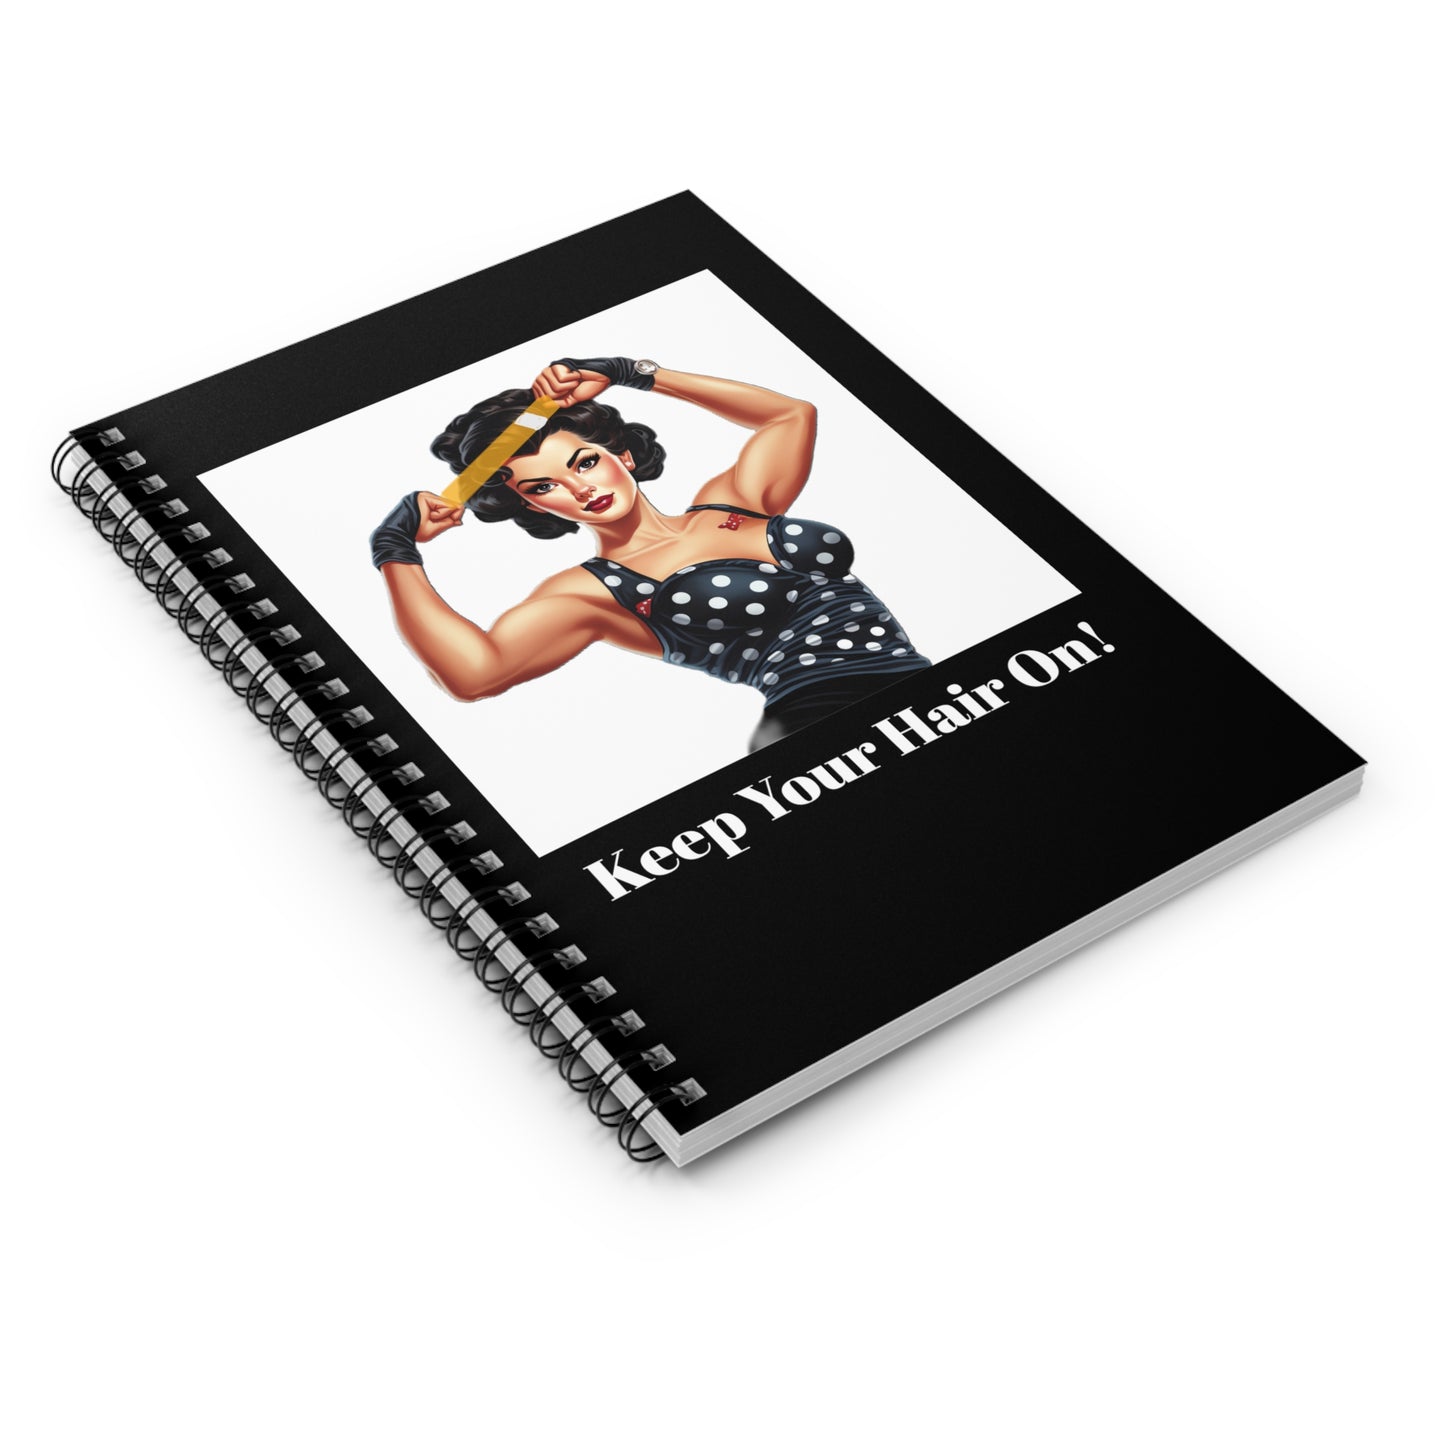 12 Keep Your Hair On (Notebook)